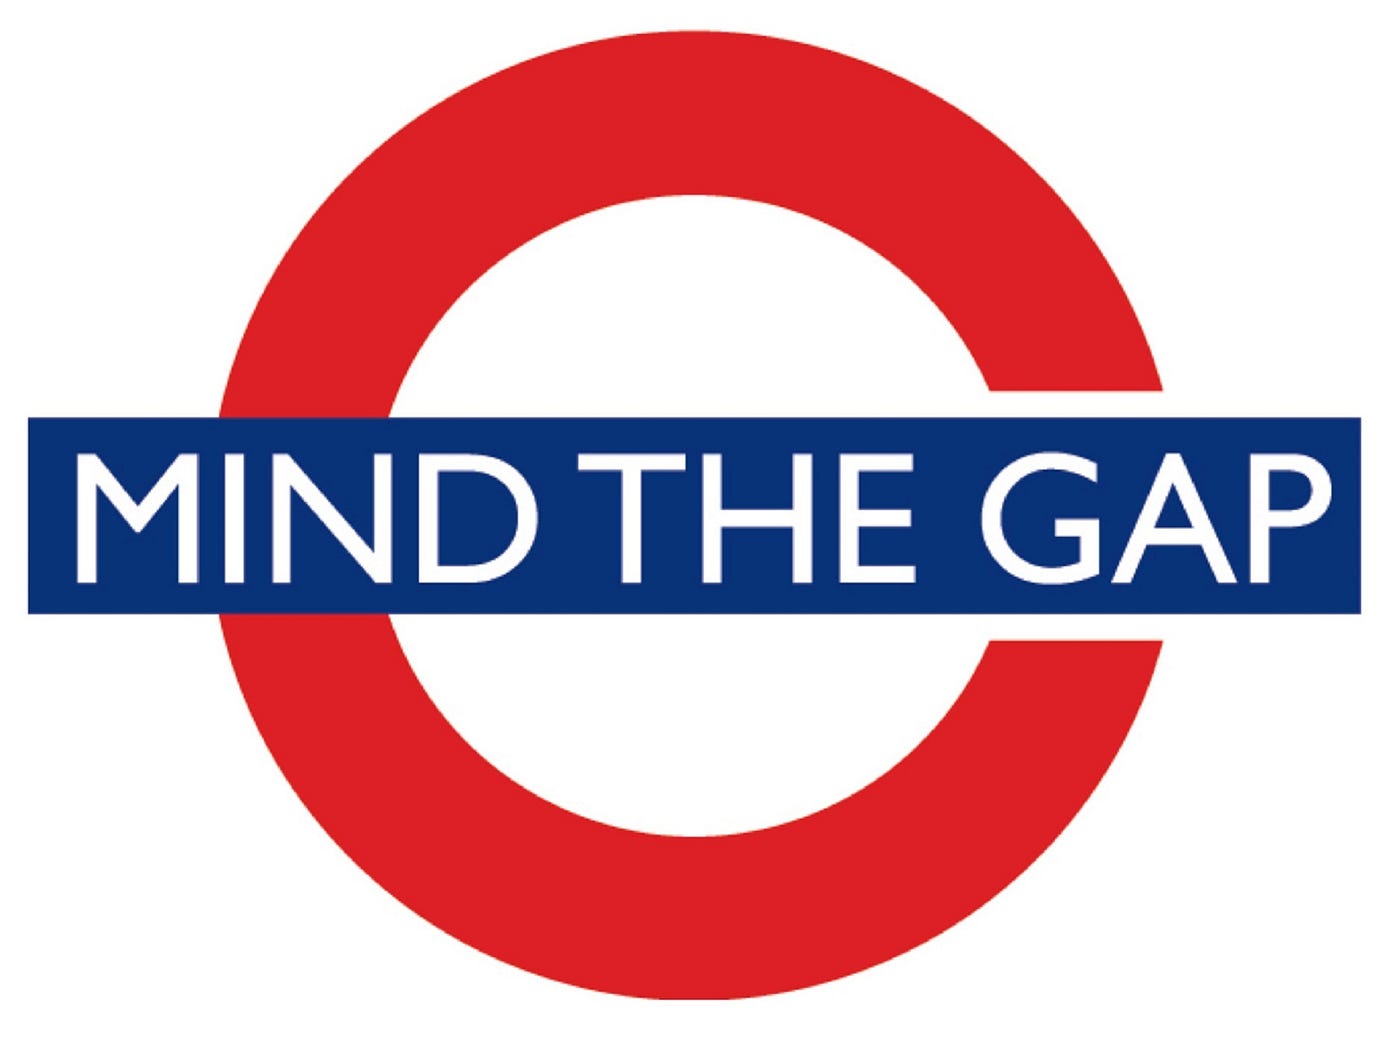 Guess what London Tube: I will not mind the GAP | by Reem Shraydeh | Medium